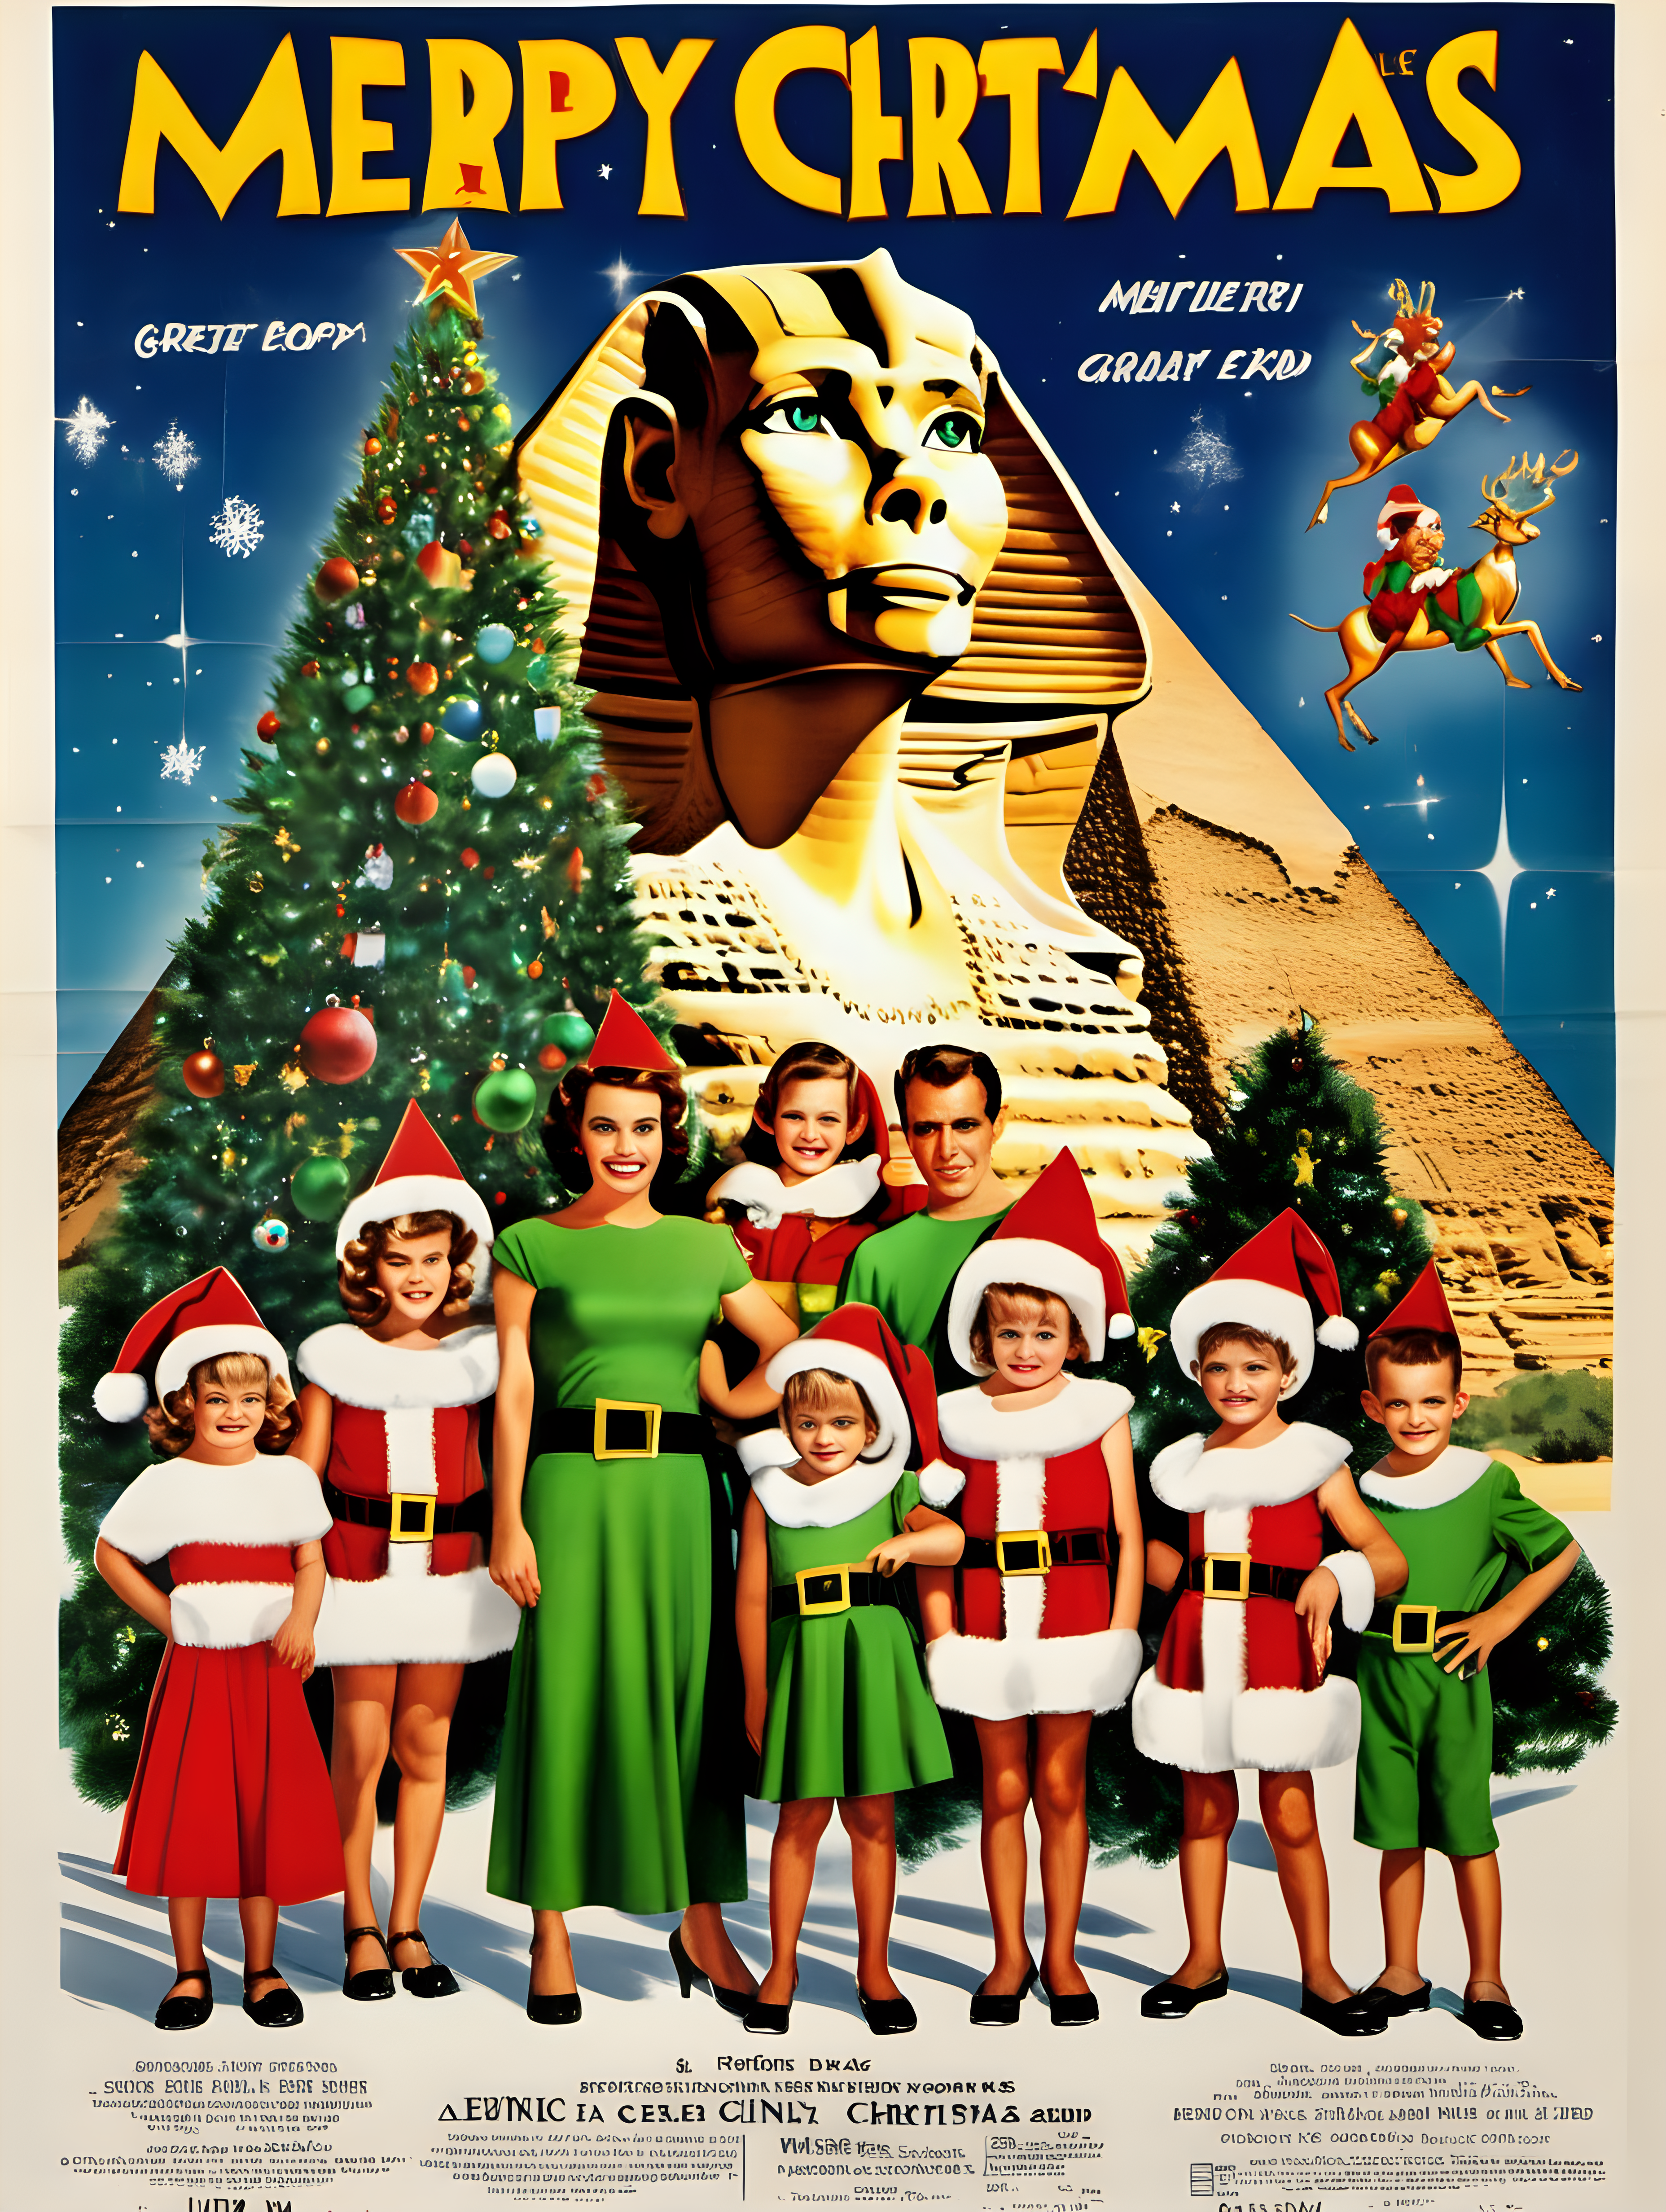 A 1950's movie poster with a mom, dad, and four kids dressed as Christmas elves with background of great sphinx in egypt + christmas tree